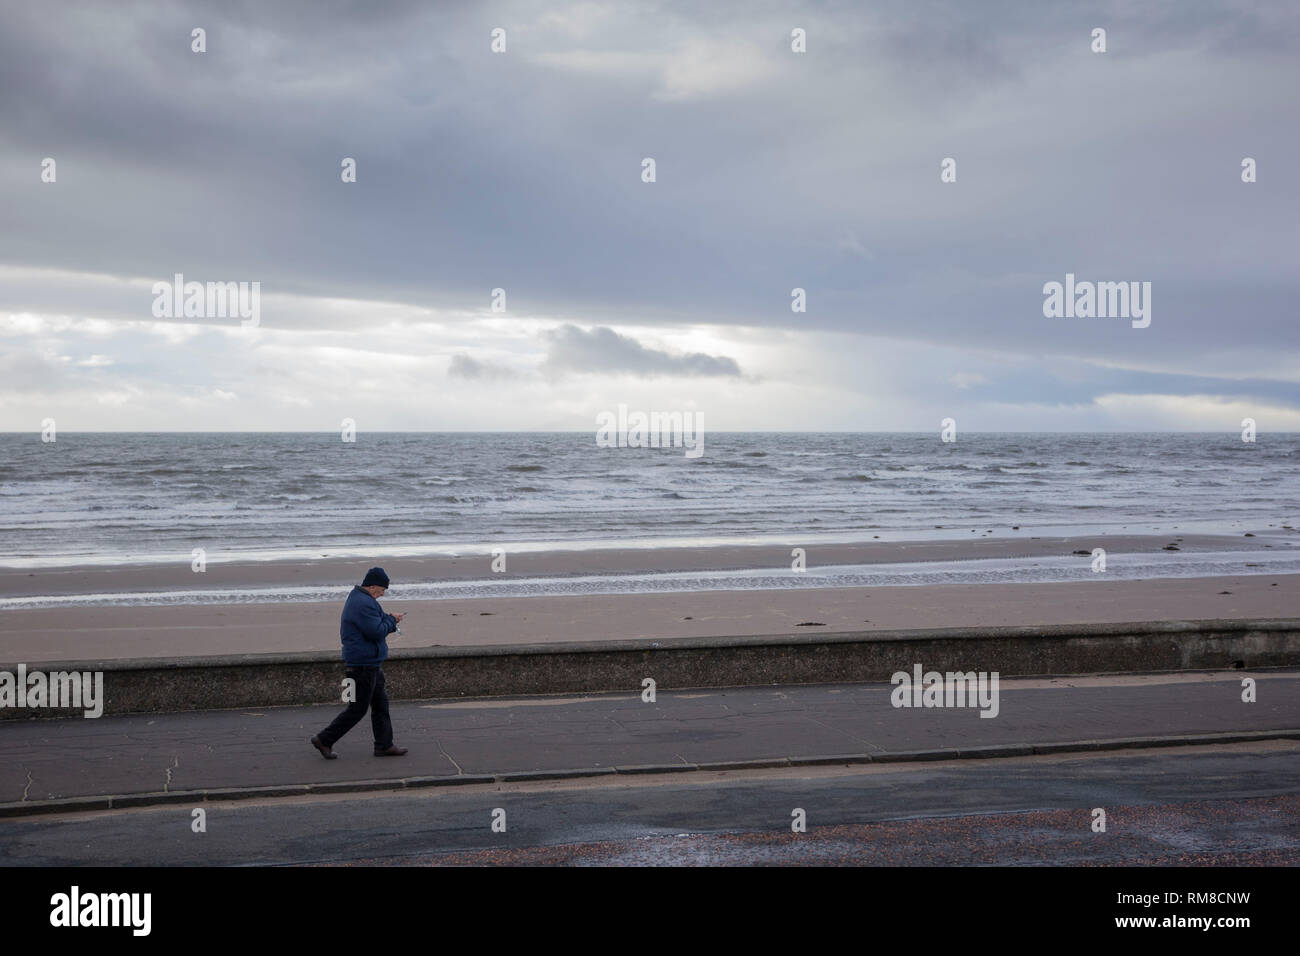 Unknown man walking The Lang Scots Mile, Ayr Promenade, ignoring the scene, looking at is mobile phone. Scotland, October 2018 Stock Photo